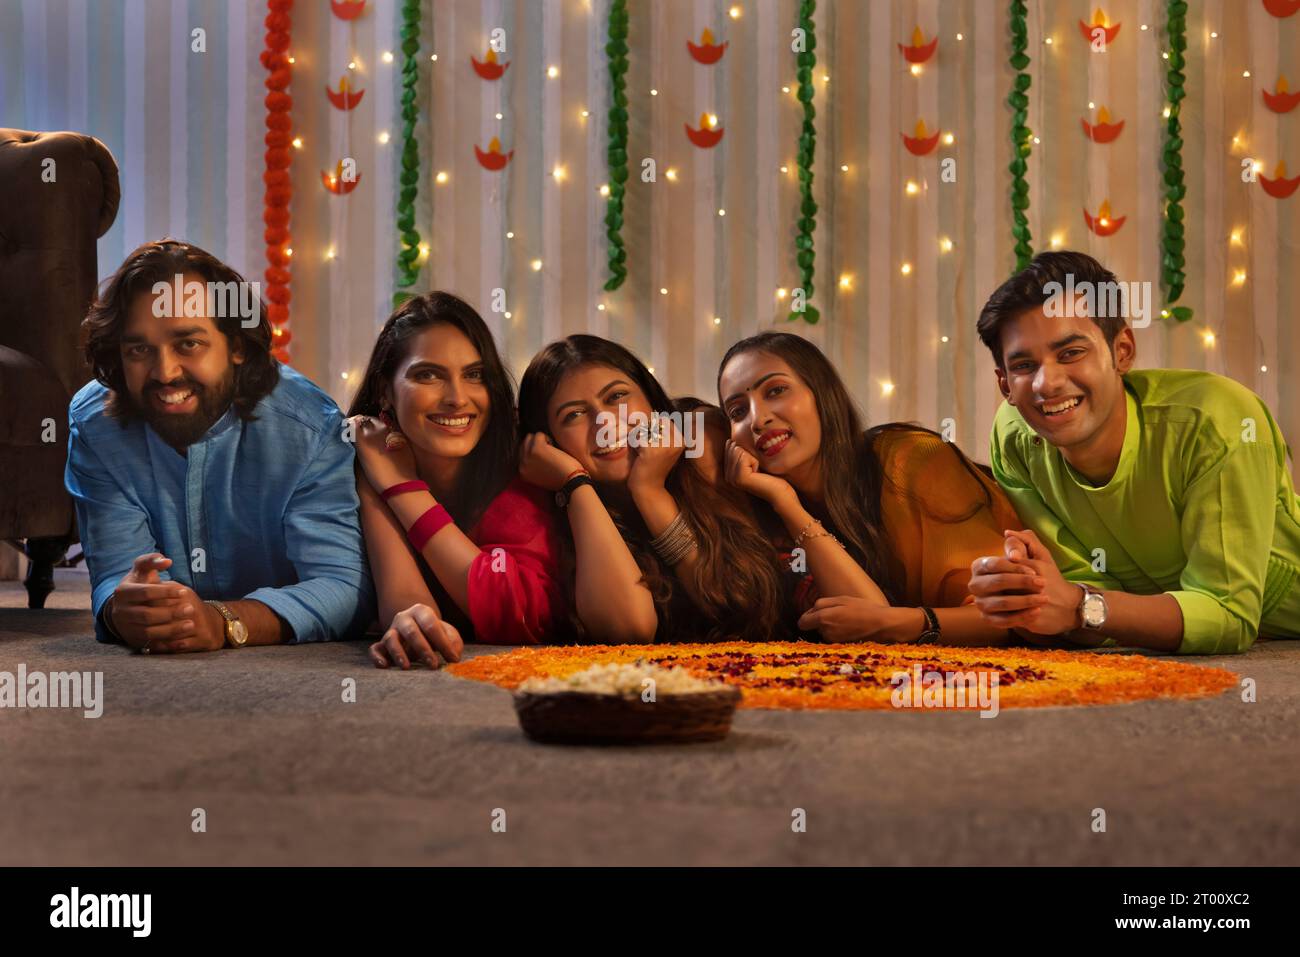 Friends lying together on floor near floral decoration during Diwali celebration Stock Photo